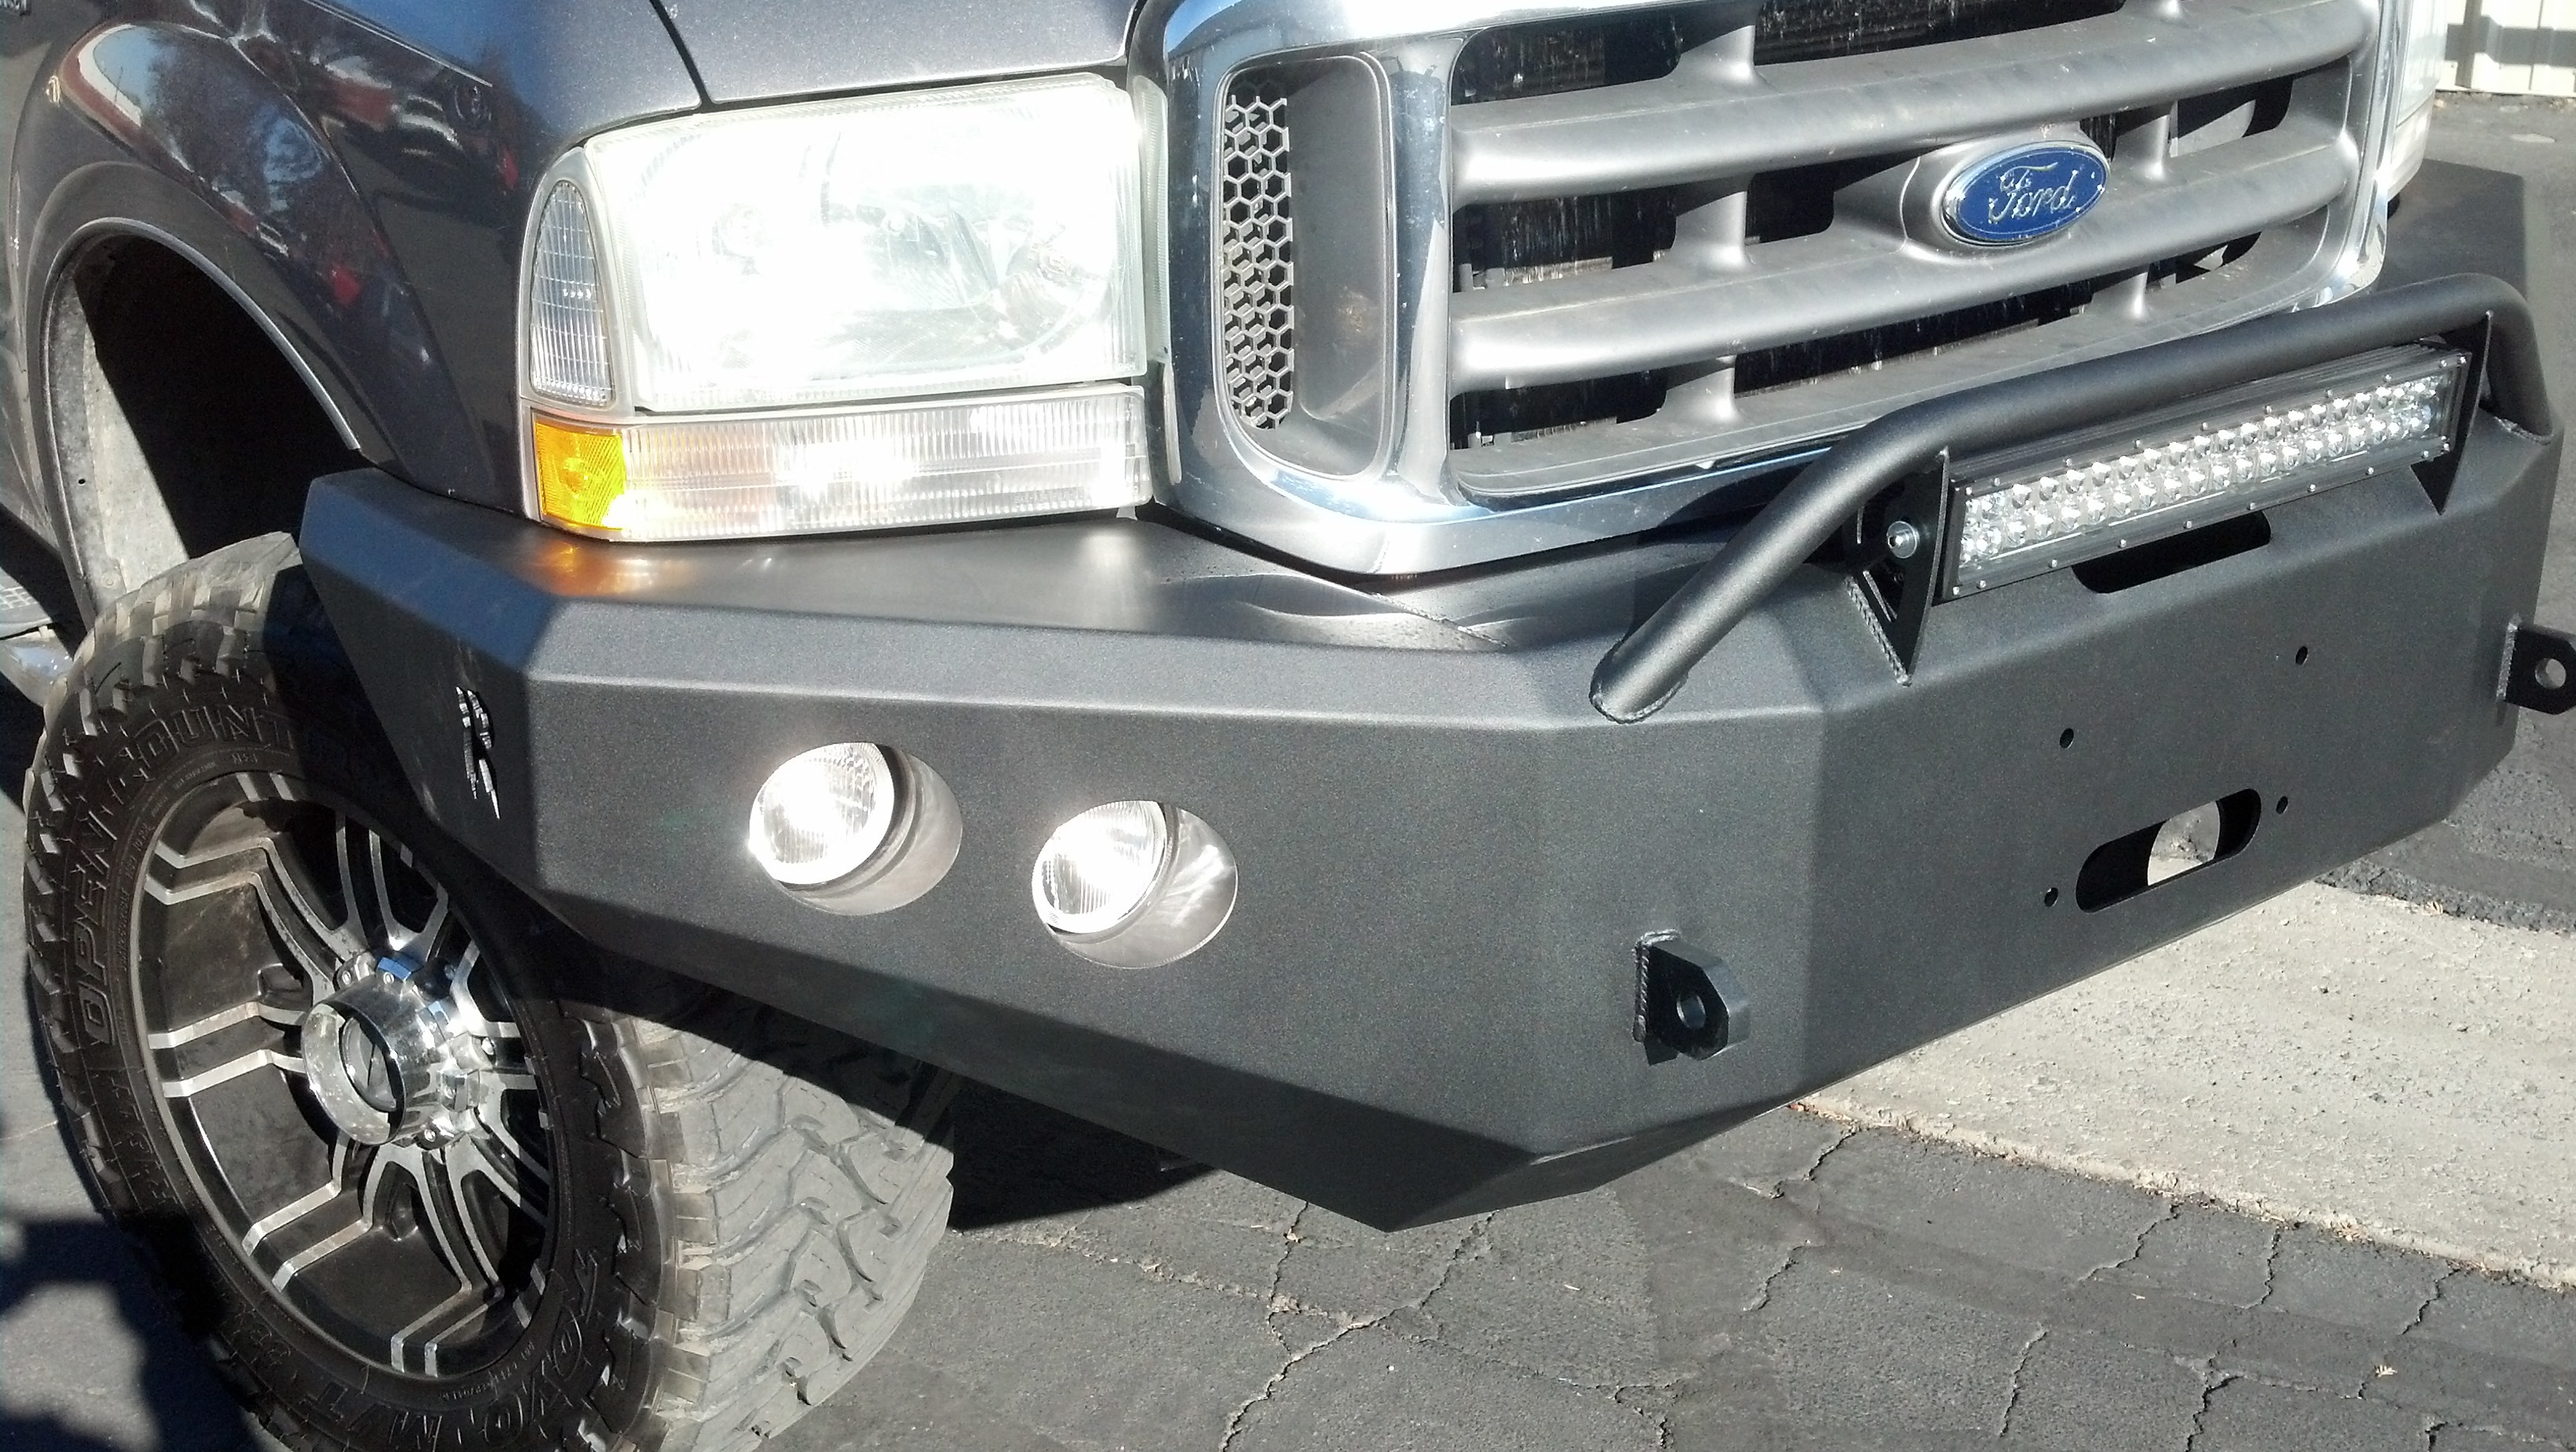 2004 Ford superduty front bumper #1